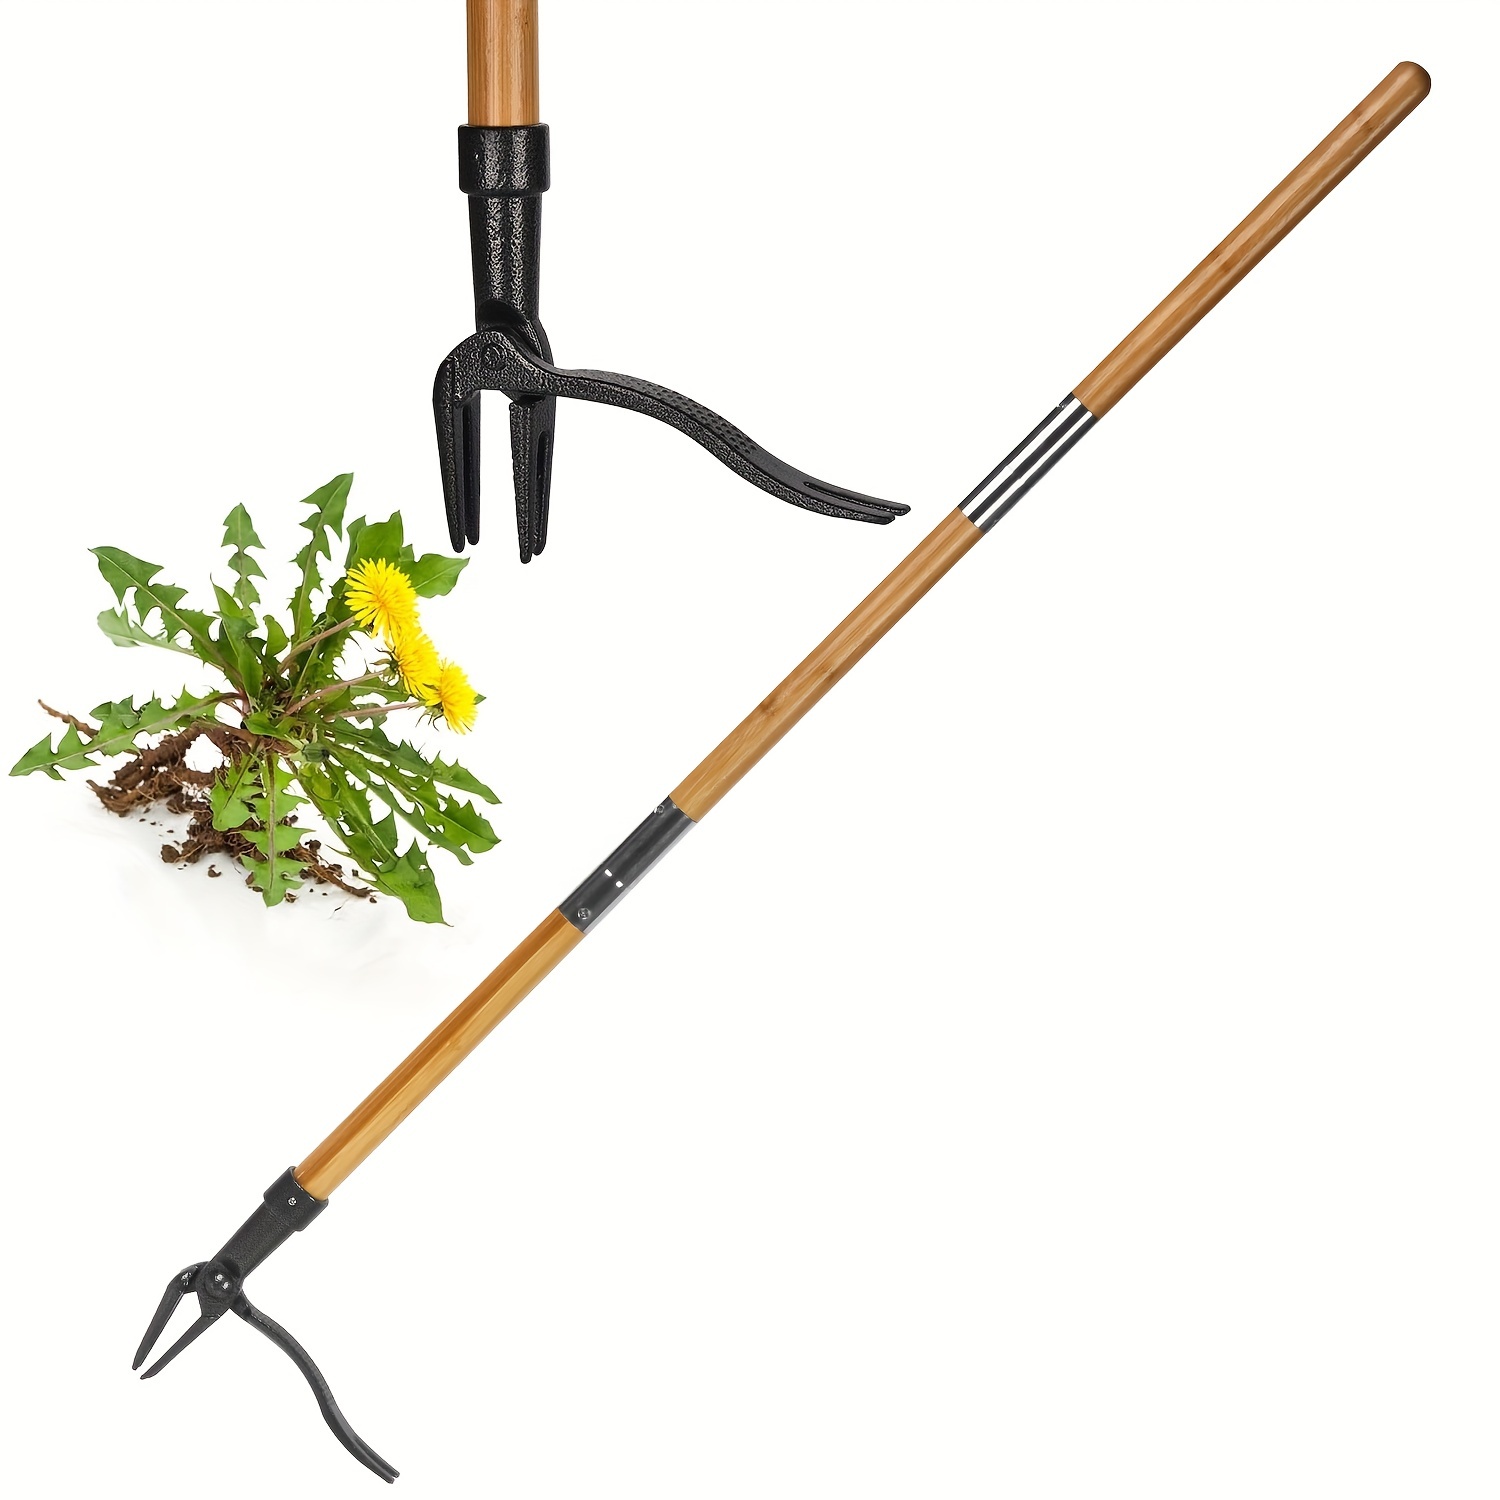 Dropship 1pc Weed Puller; Stand Up Weeder Hand Tool; Long Handle Garden Weeding  Tool With 3 Claws; Hand Weed Hound Weed Puller For Dandelion; Standup Weed  Root Pulling to Sell Online at